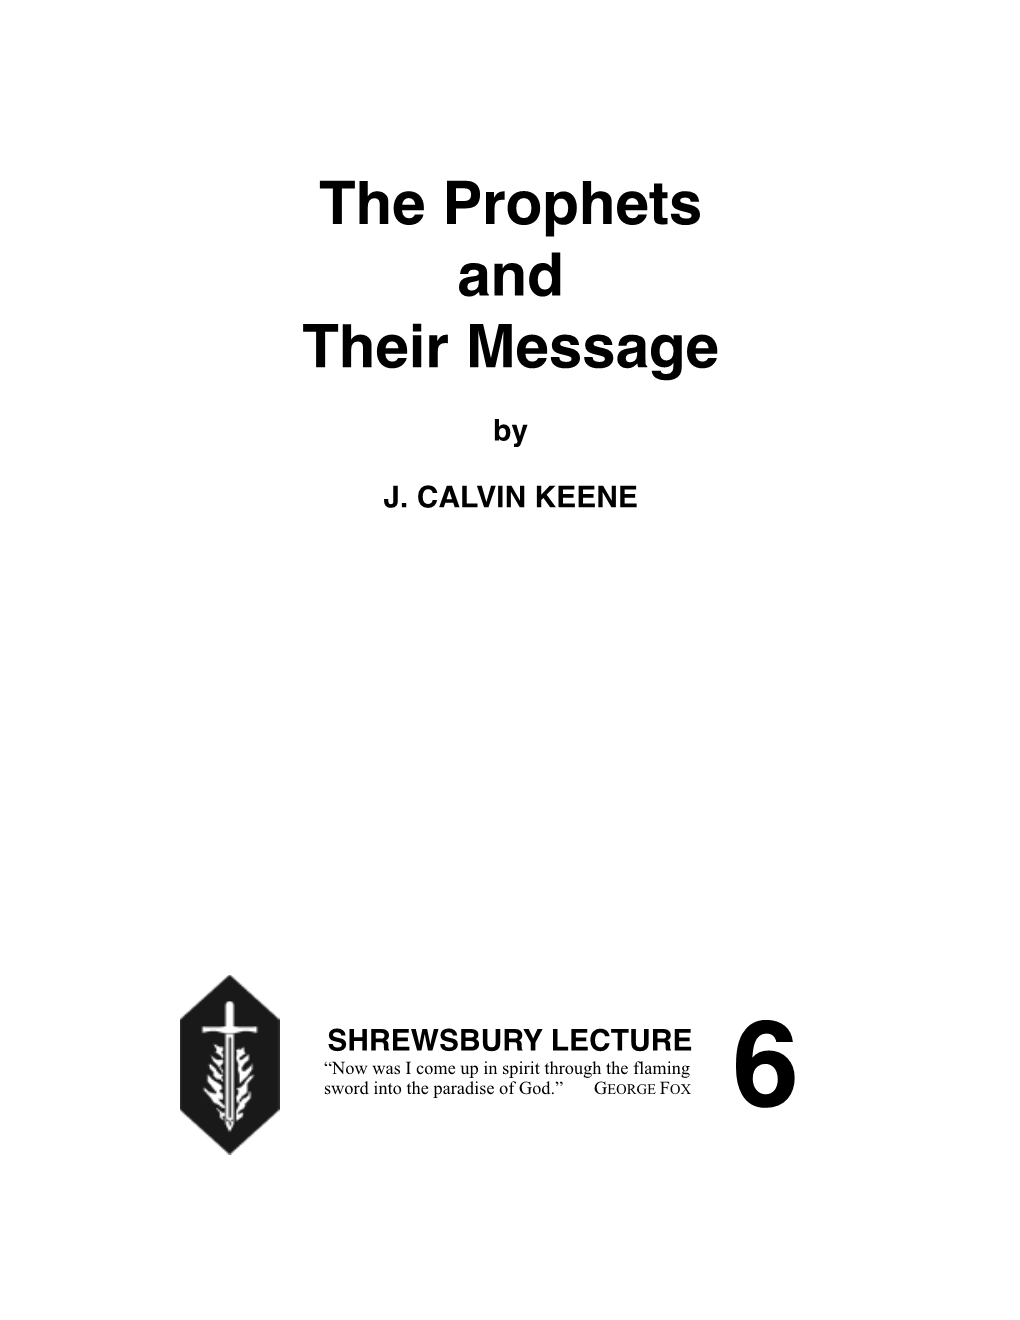 The Prophets and Their Message